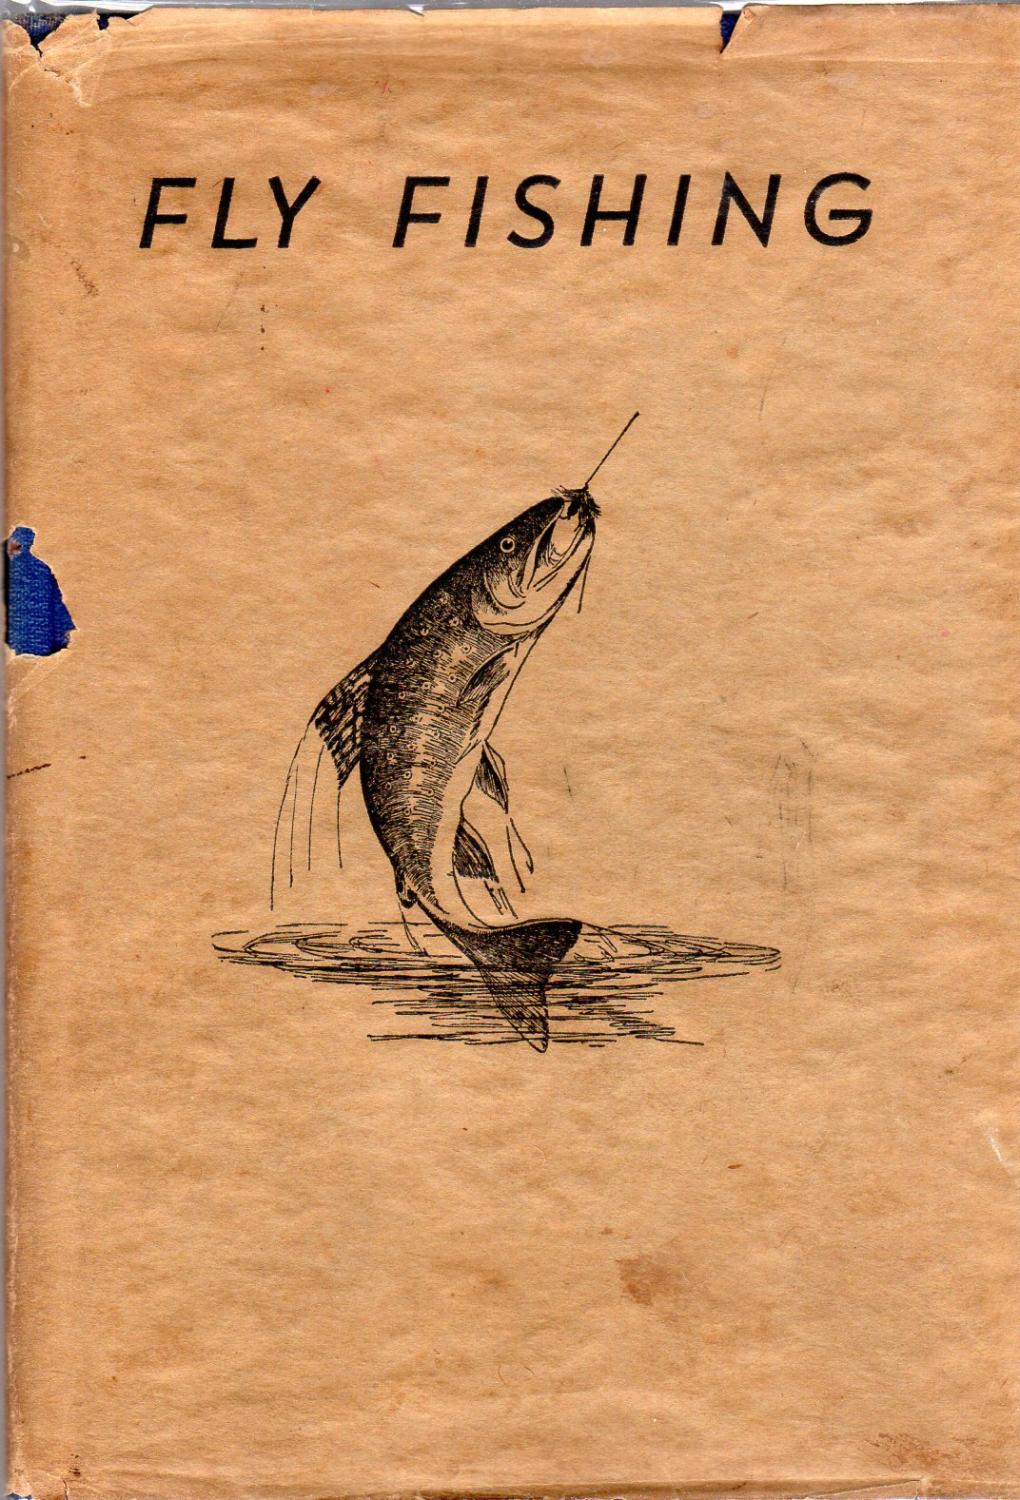 Fly Fishing: with Instructions on Fly Tying by Frances C. Wood (in scarce  dust jacket) by Cumings, Edward: Very Good Hardcover (1934) 1st Edition